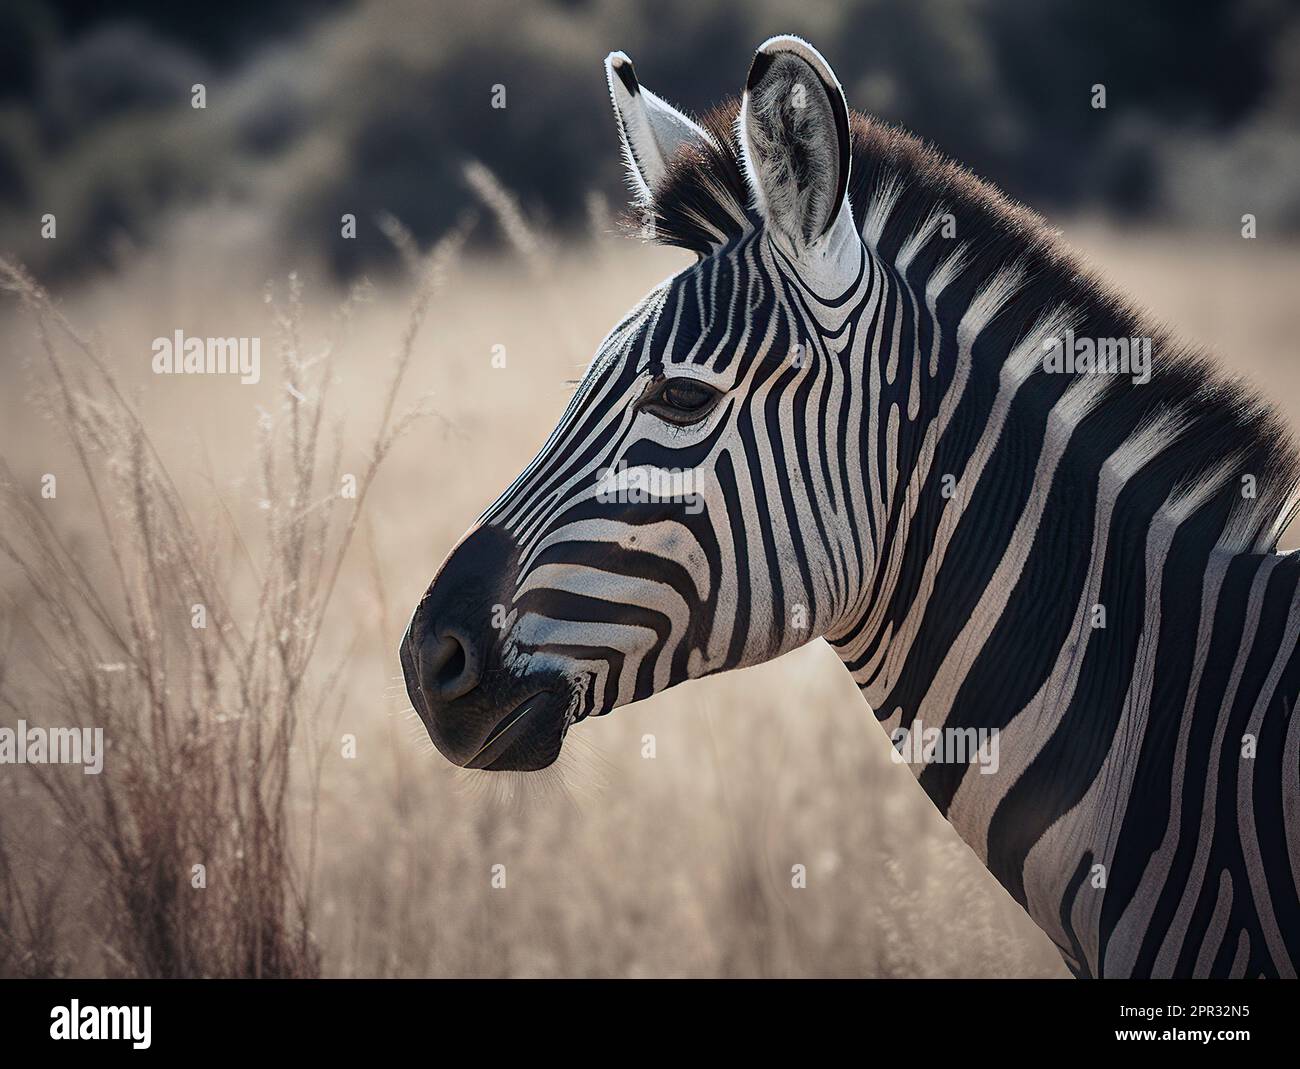 spectacular close-up of a zebra in the wild Stock Photo